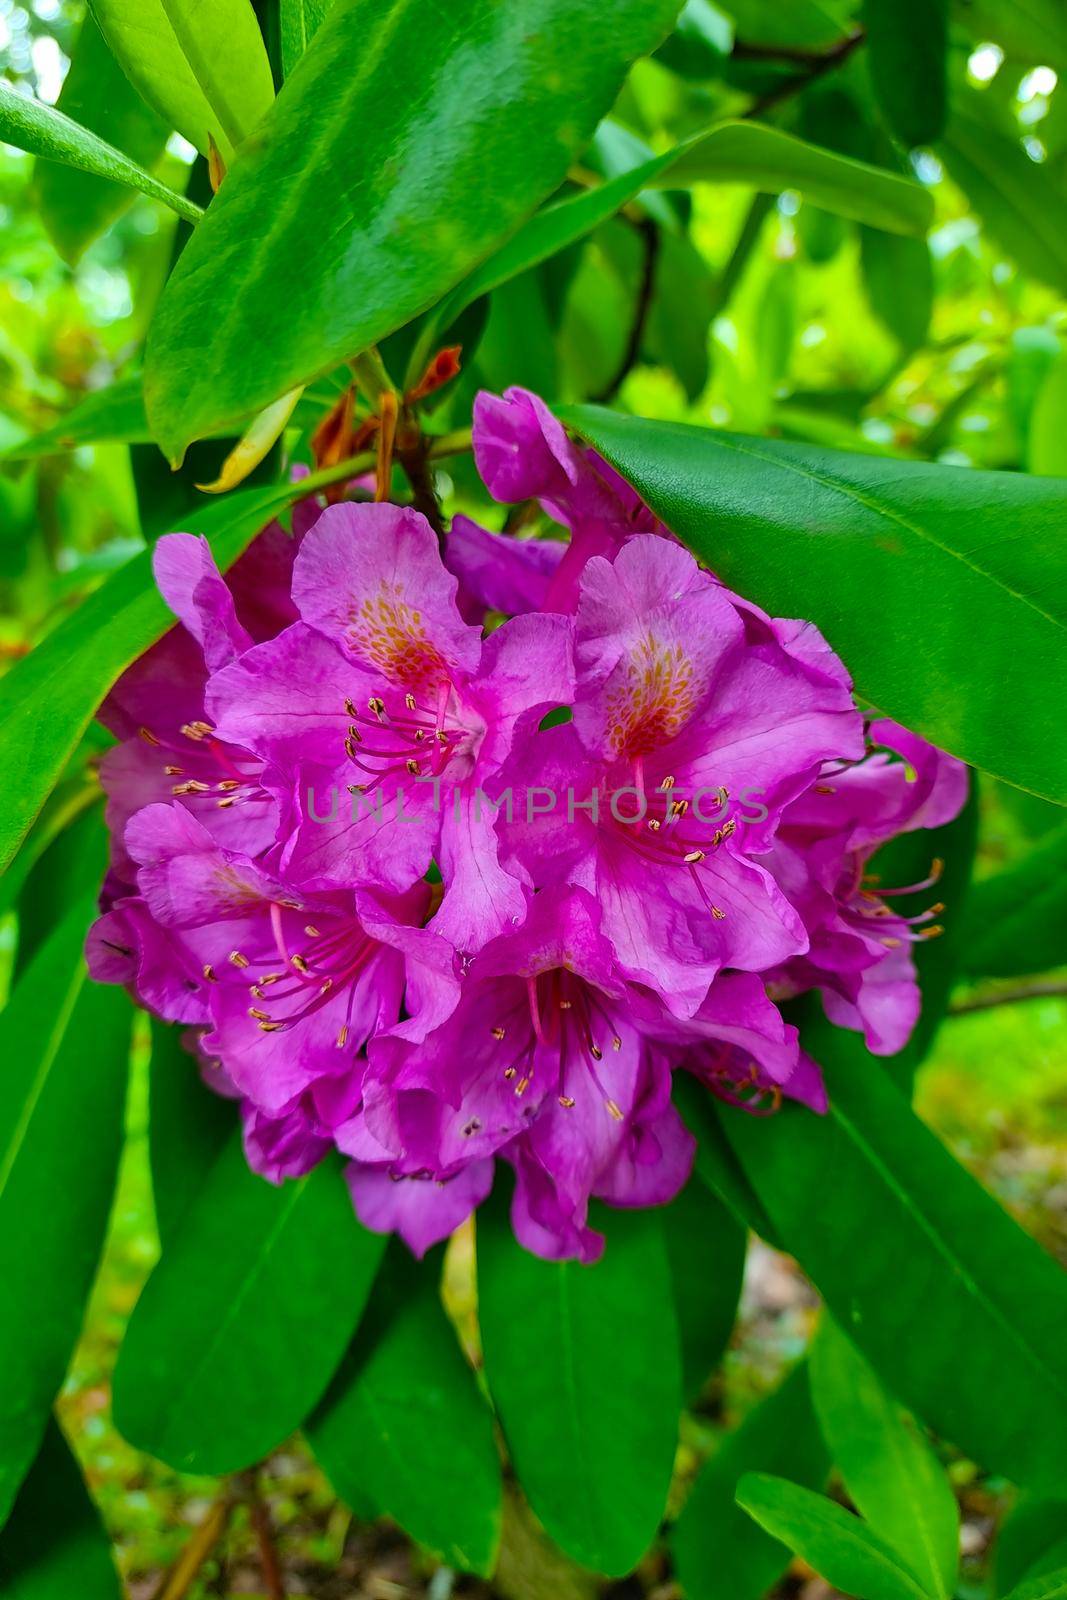 Beautiful bud of flowering rhododendron in the garden in spring. by kip02kas